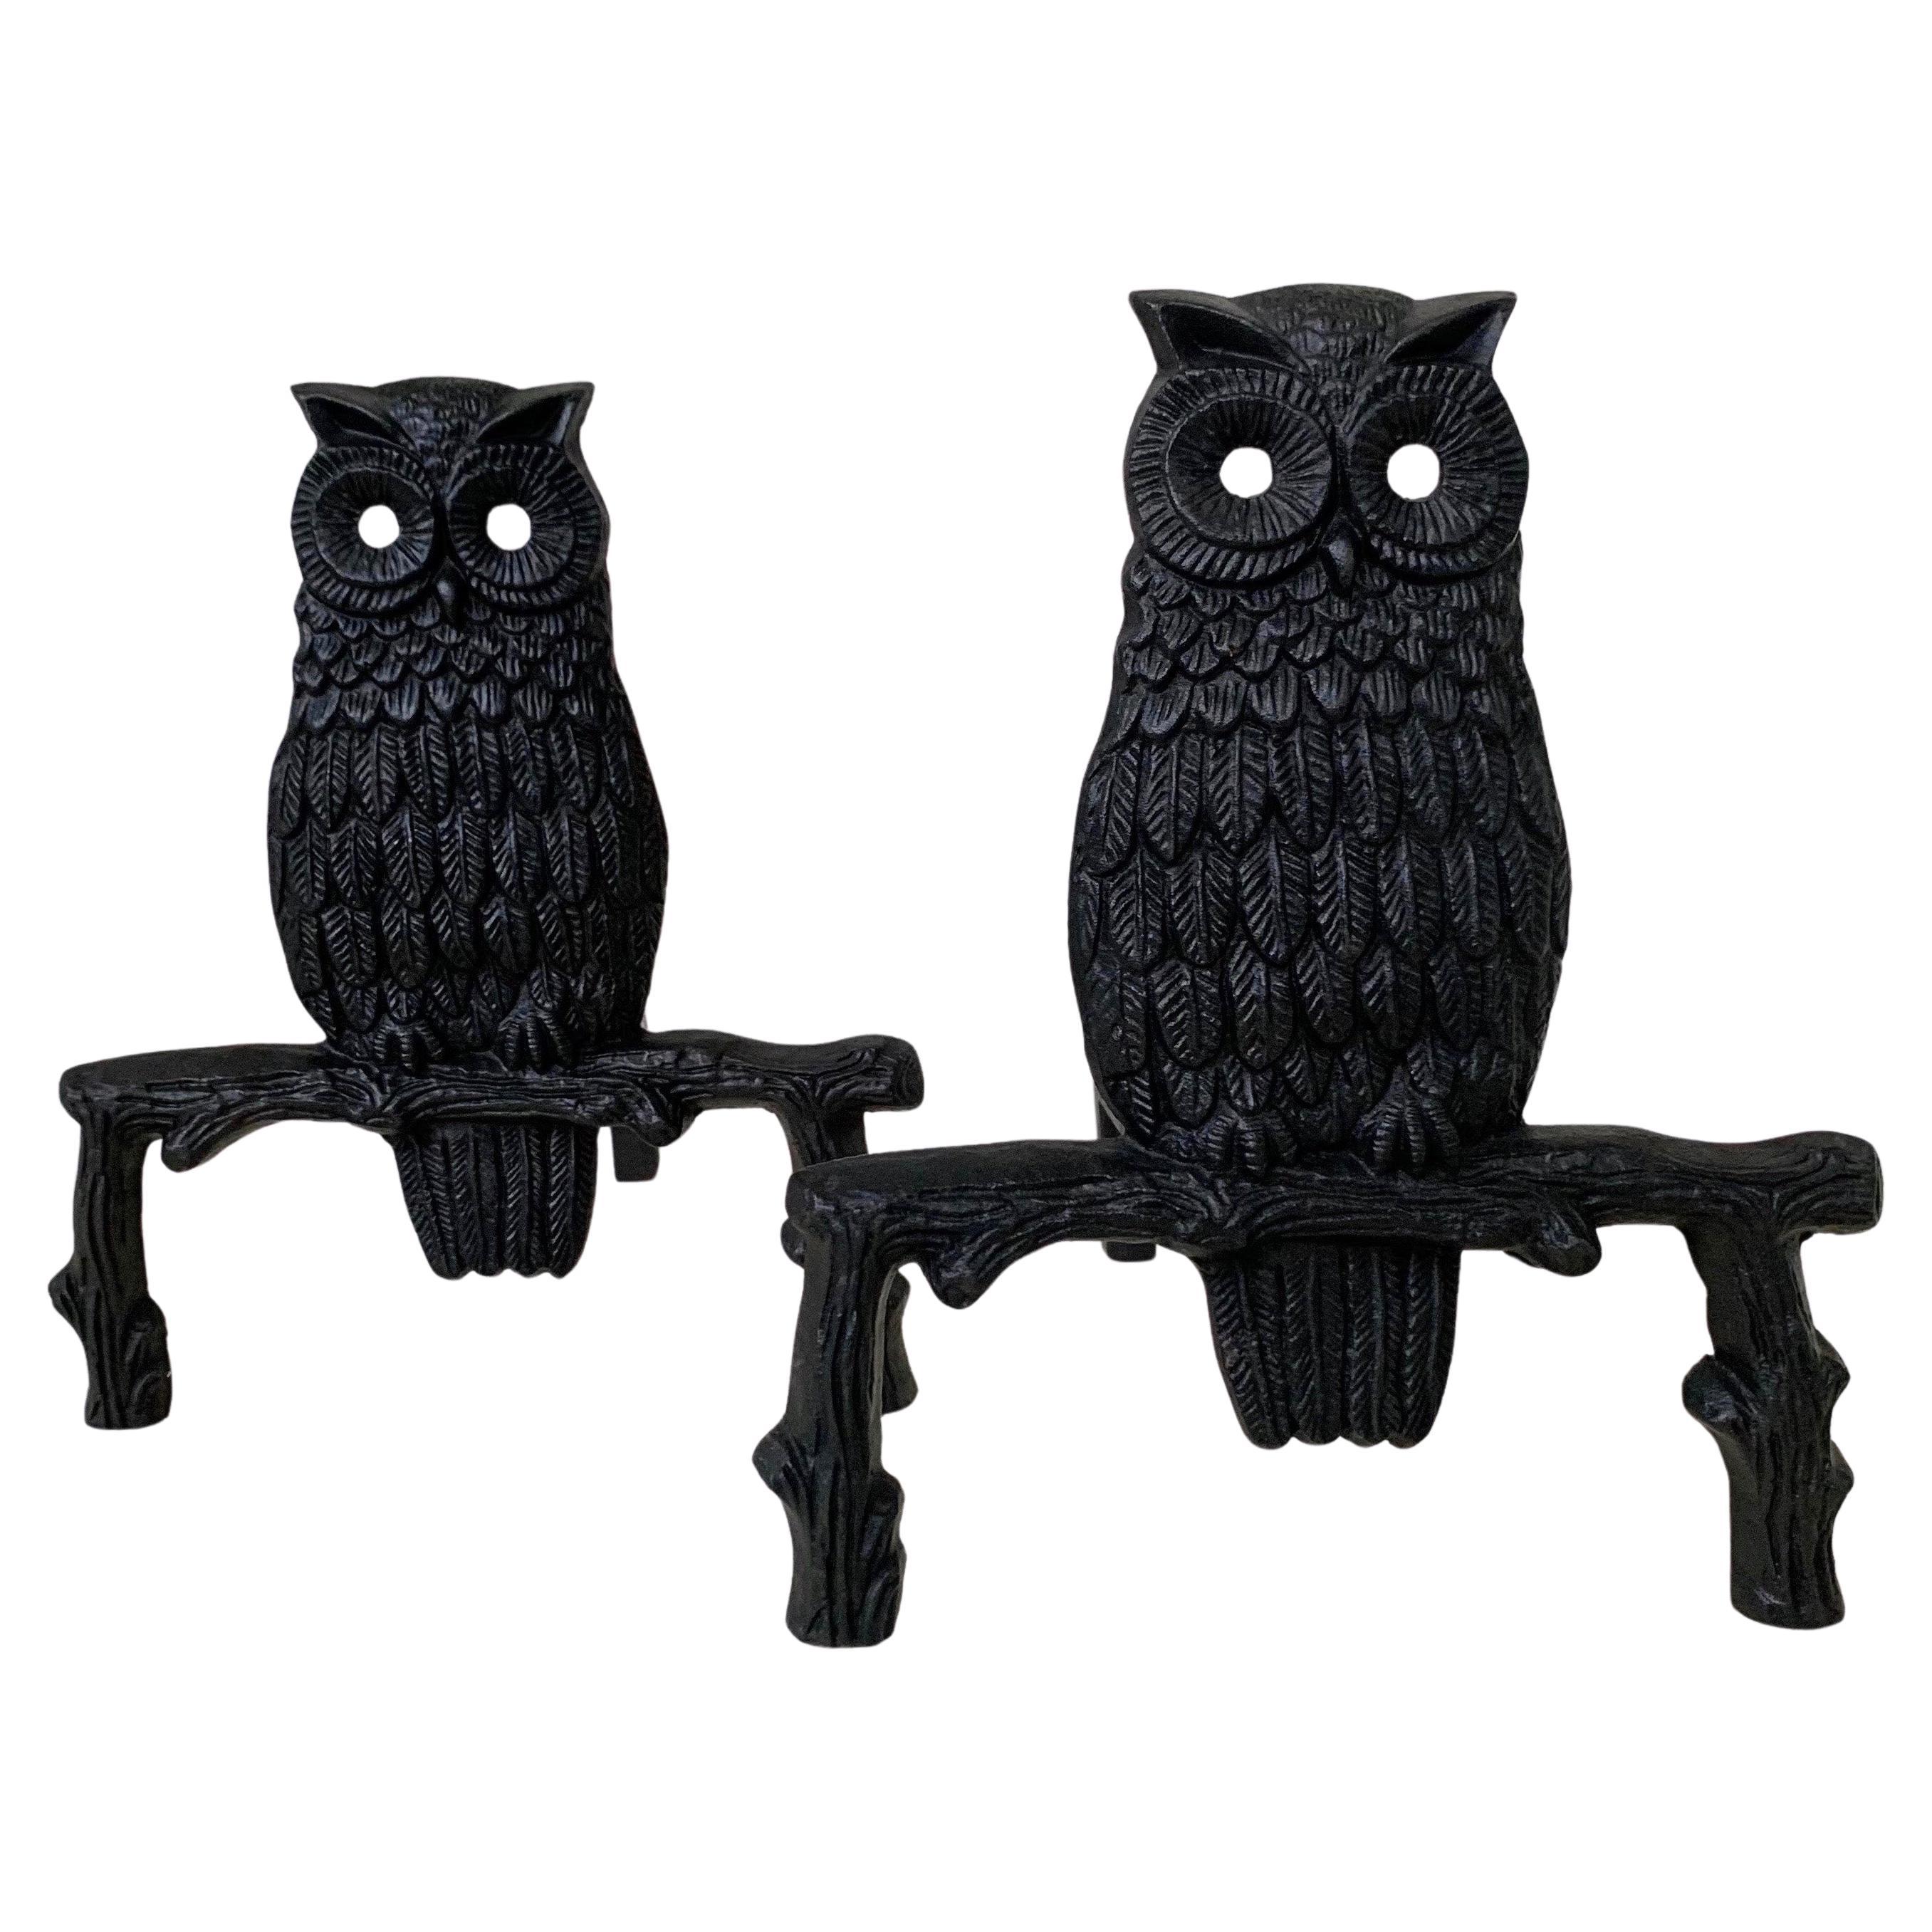 Nice owl andirons, circa 1960, France.
Fine and detailed metal work.
Cast and wrought iron.
Original good condition.
Dimensions: 41 cm D, 33 cm H, 29 cm W.
All purchases are covered by our Buyer Protection Guarantee.
This item can be returned within